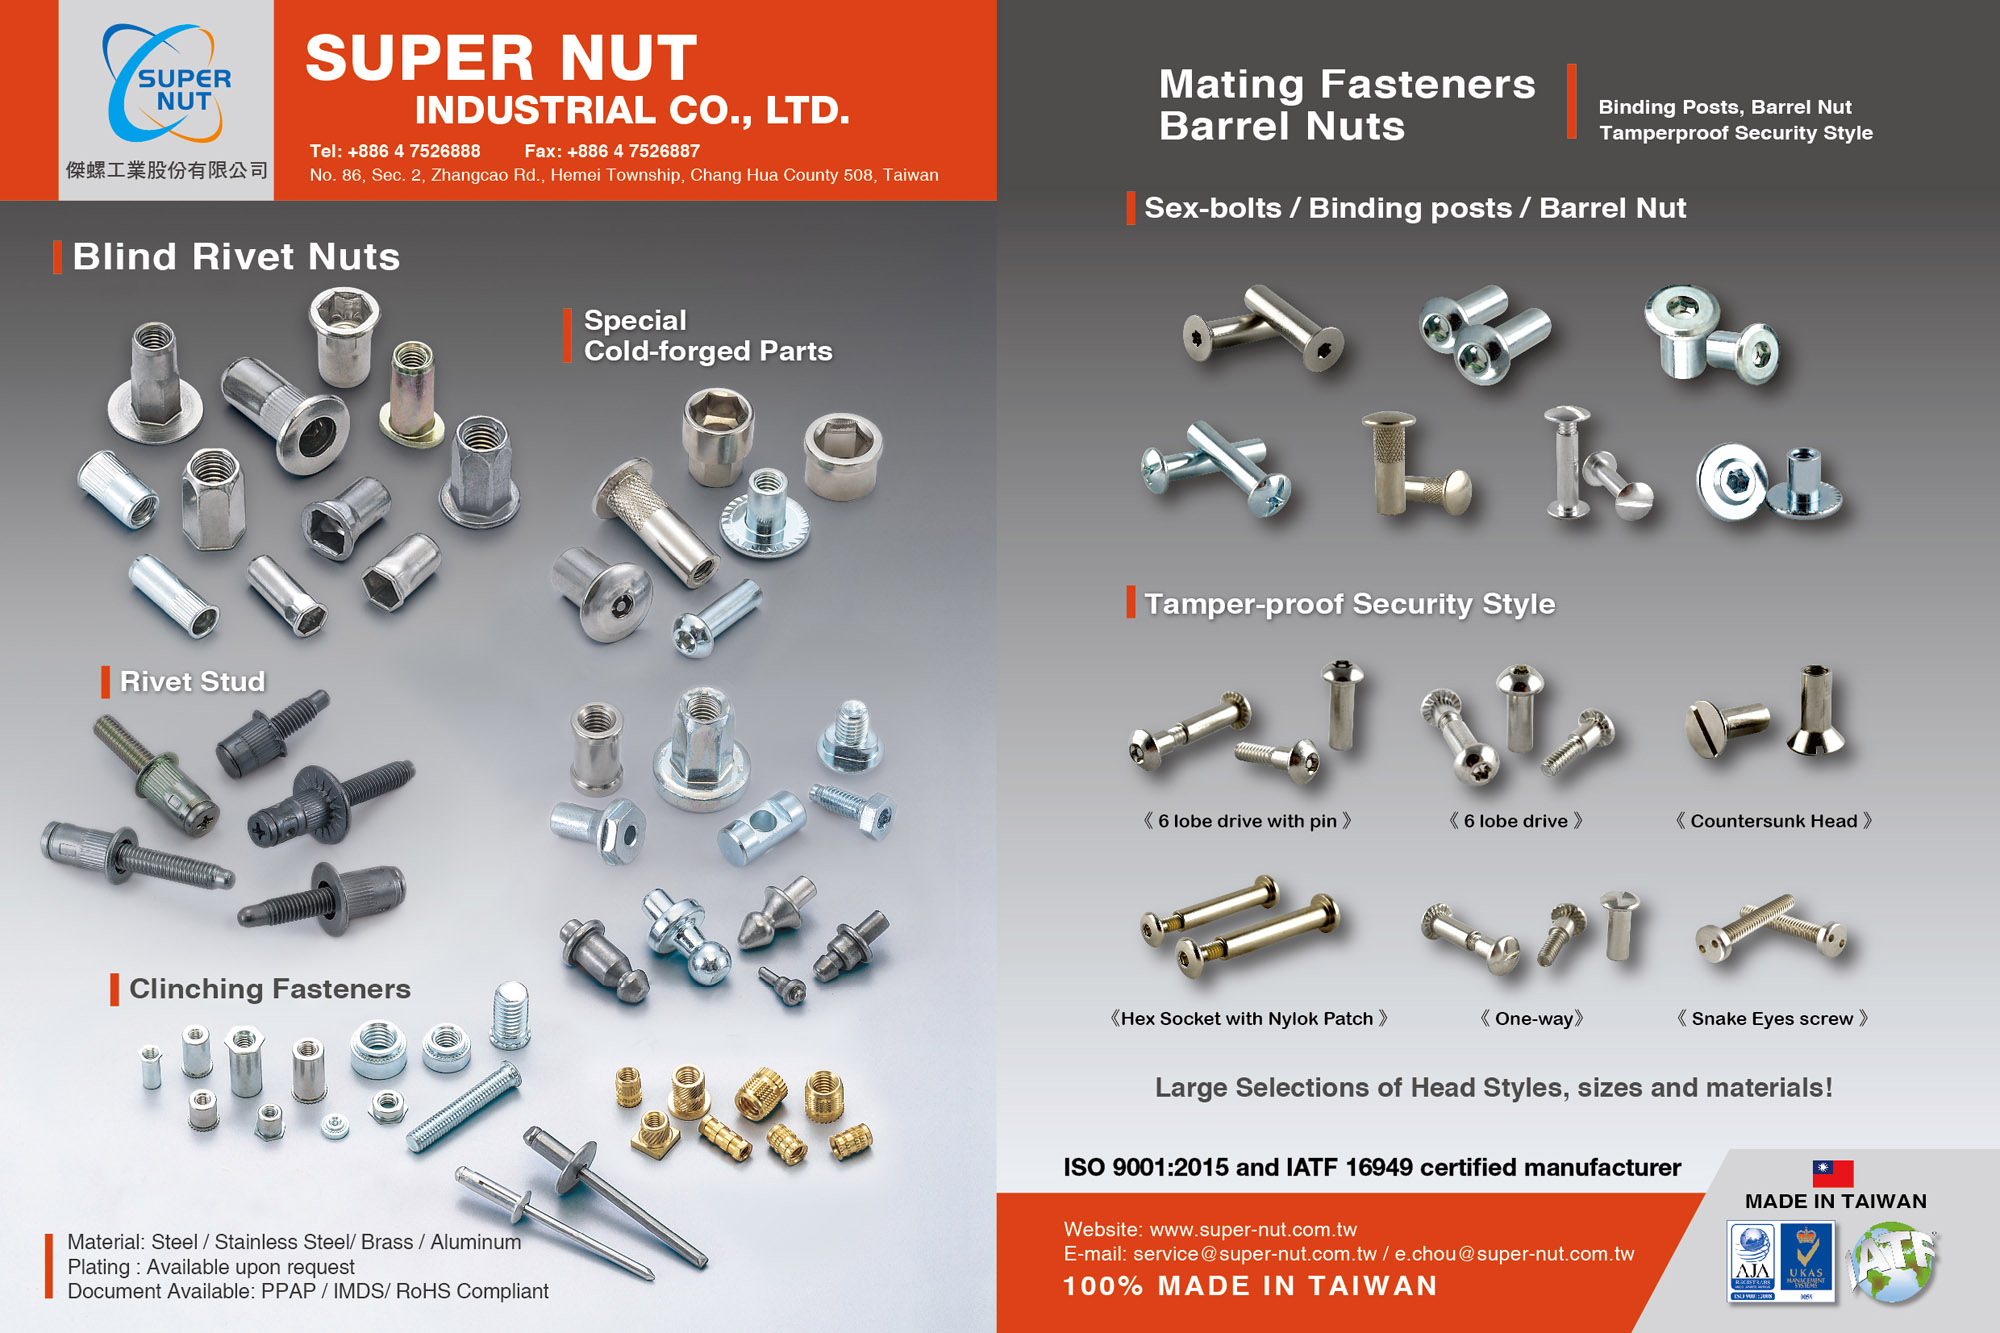 SUPER NUT INDUSTRIAL CO., LTD.  , Blind Rivet Nuts, Special Cold-forged Parts, Rivet Stud, Clinching Fasteners, Mating Fastener Barrel Nuts, Sex-bolts, Binding Posts, Tamper-proof Security Style , Blind Nuts / Rivet Nuts